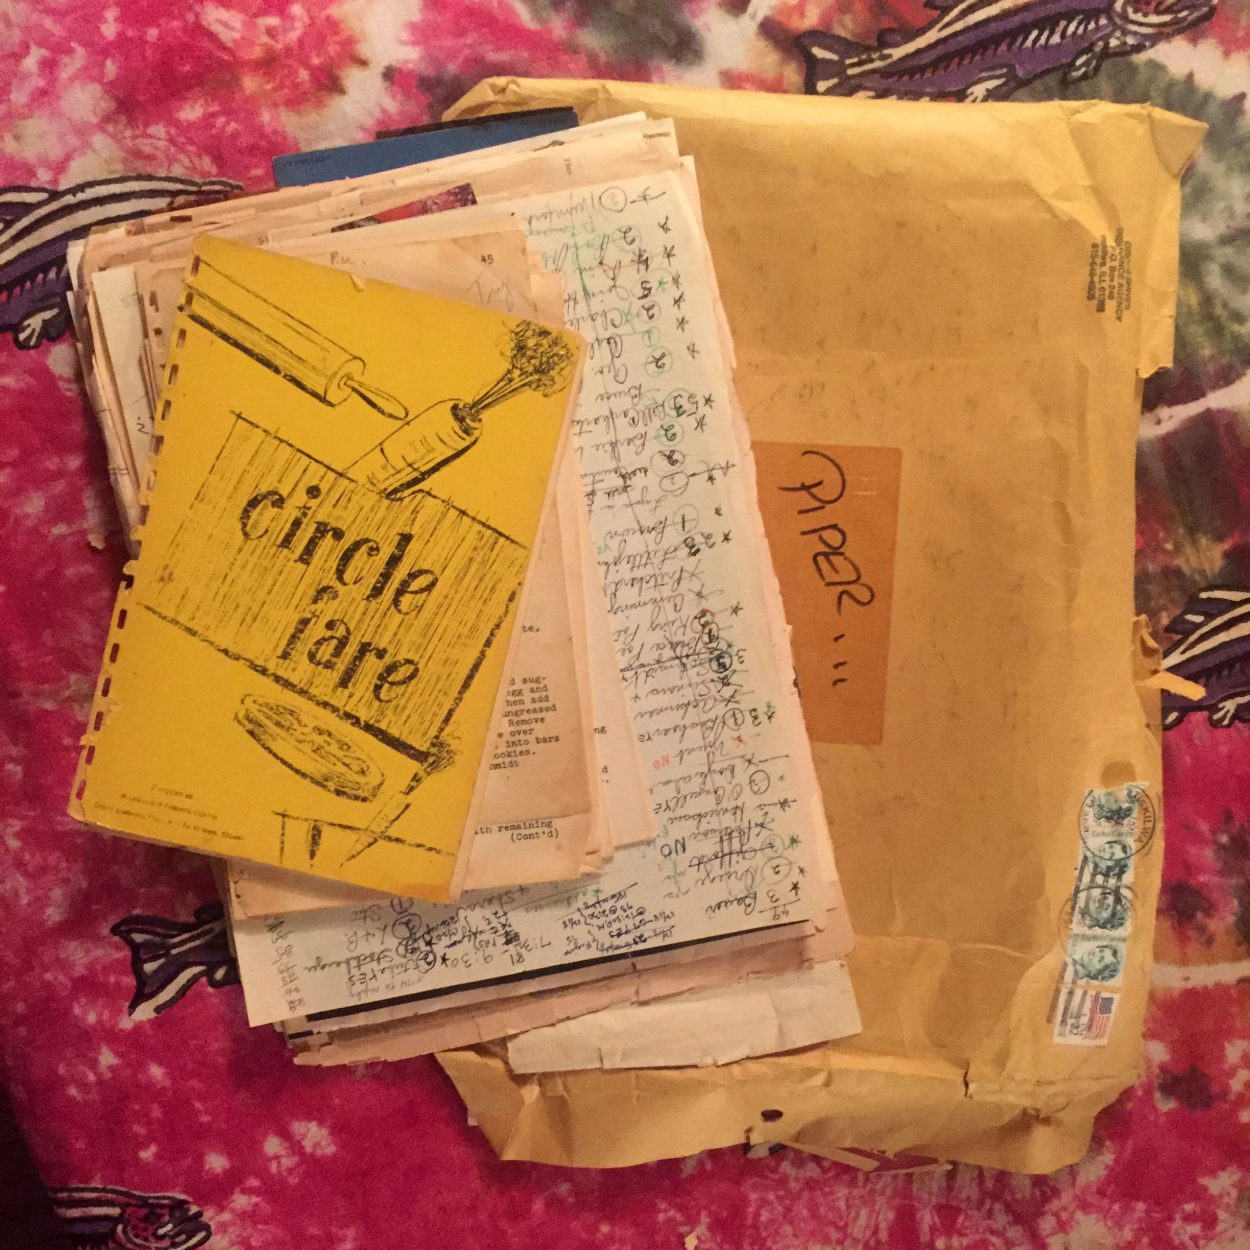 Stack of hand-written recipes on a tie dyed bedspread